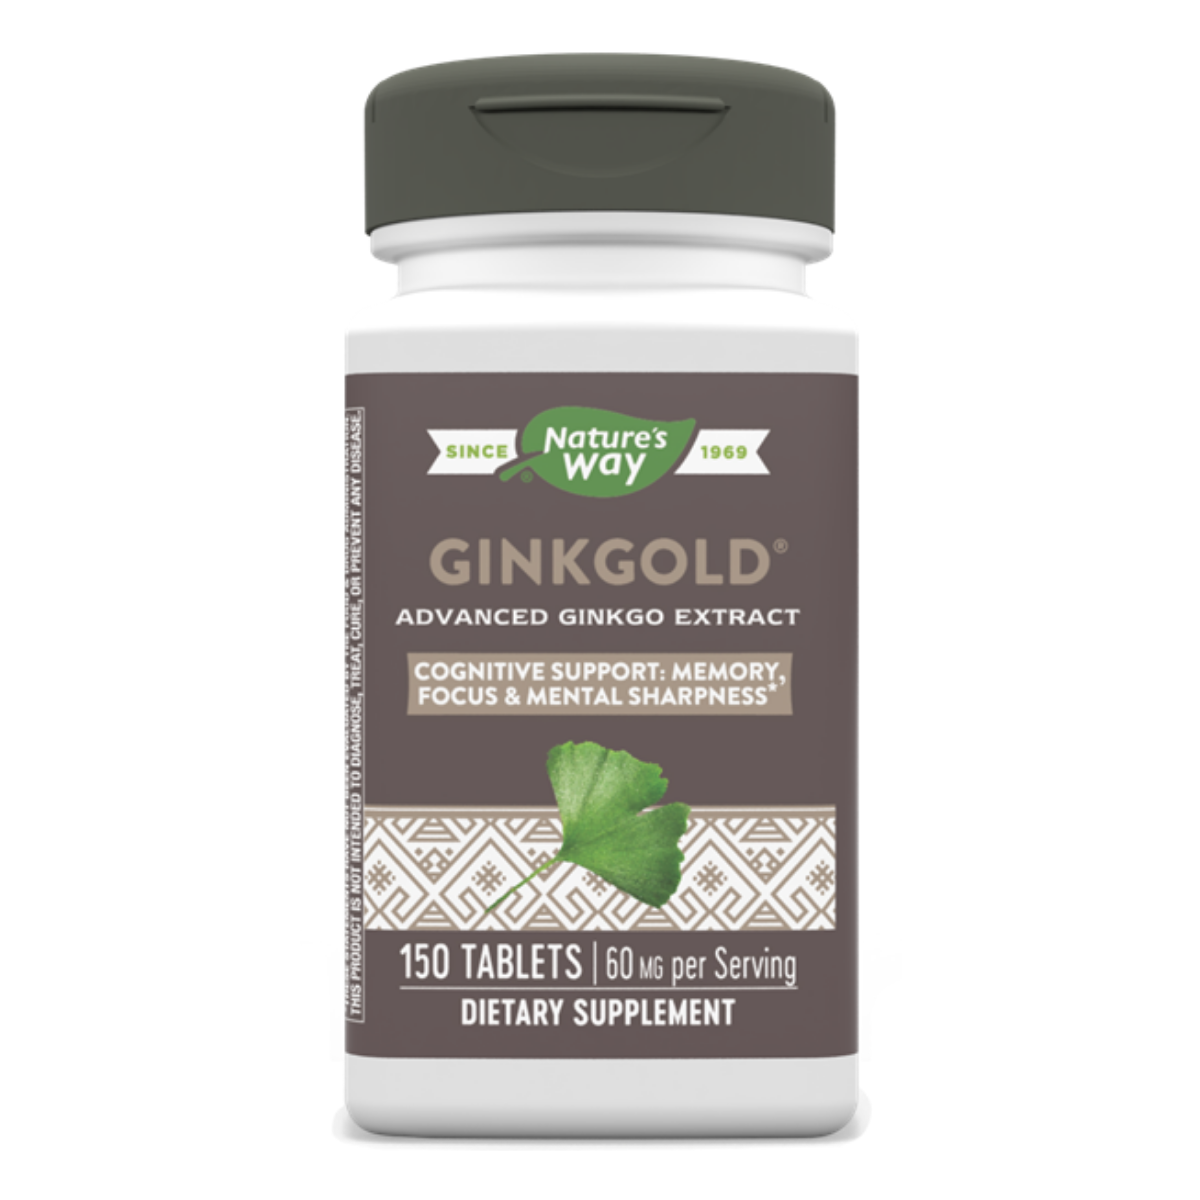 Primary image of Ginkgold